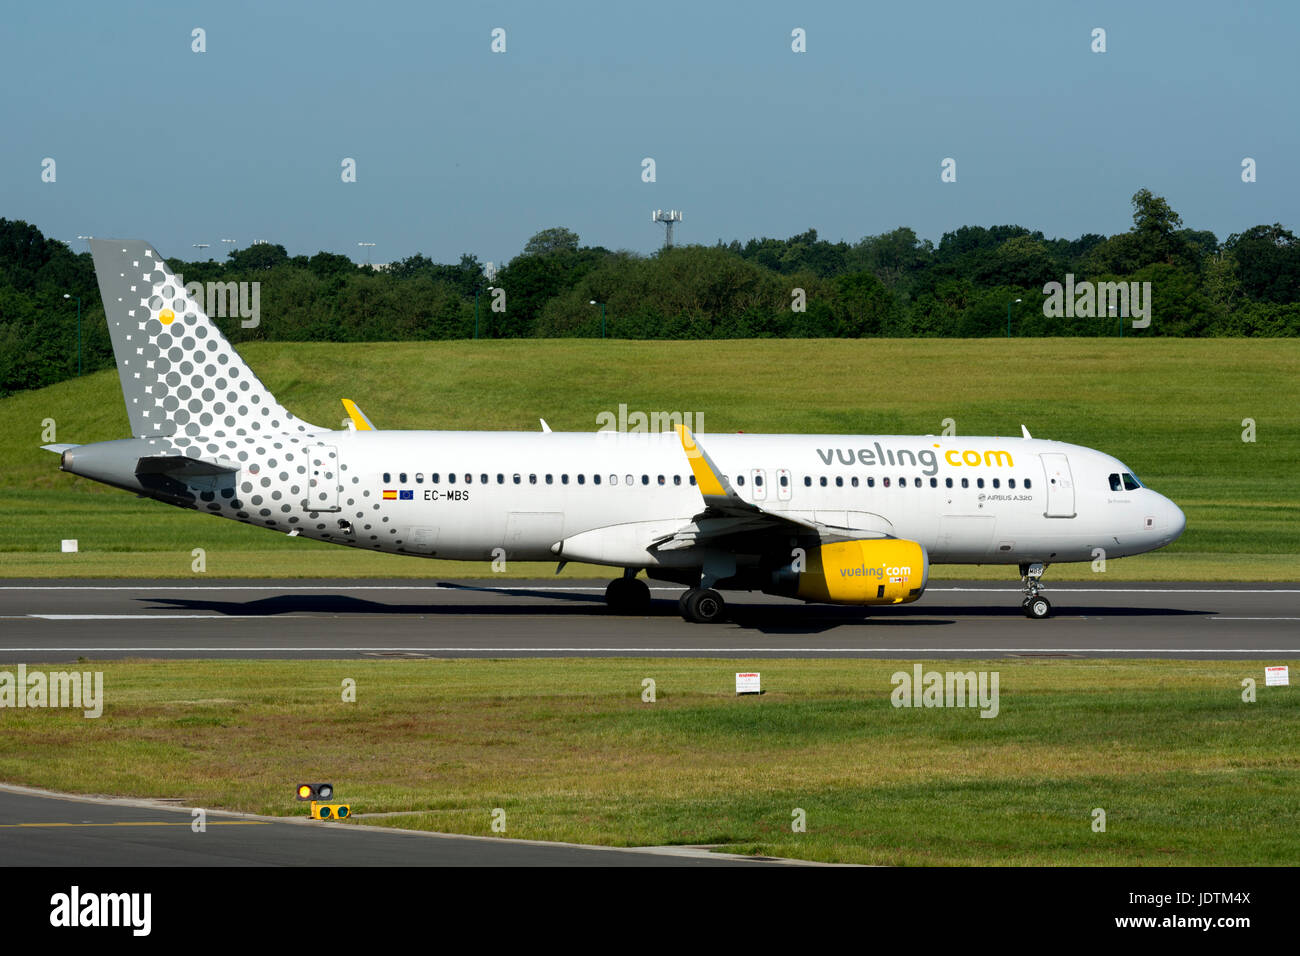 Vueling Airbus A320 ready for take off at Birmingham Airport, UK (EC-MBS) Stock Photo